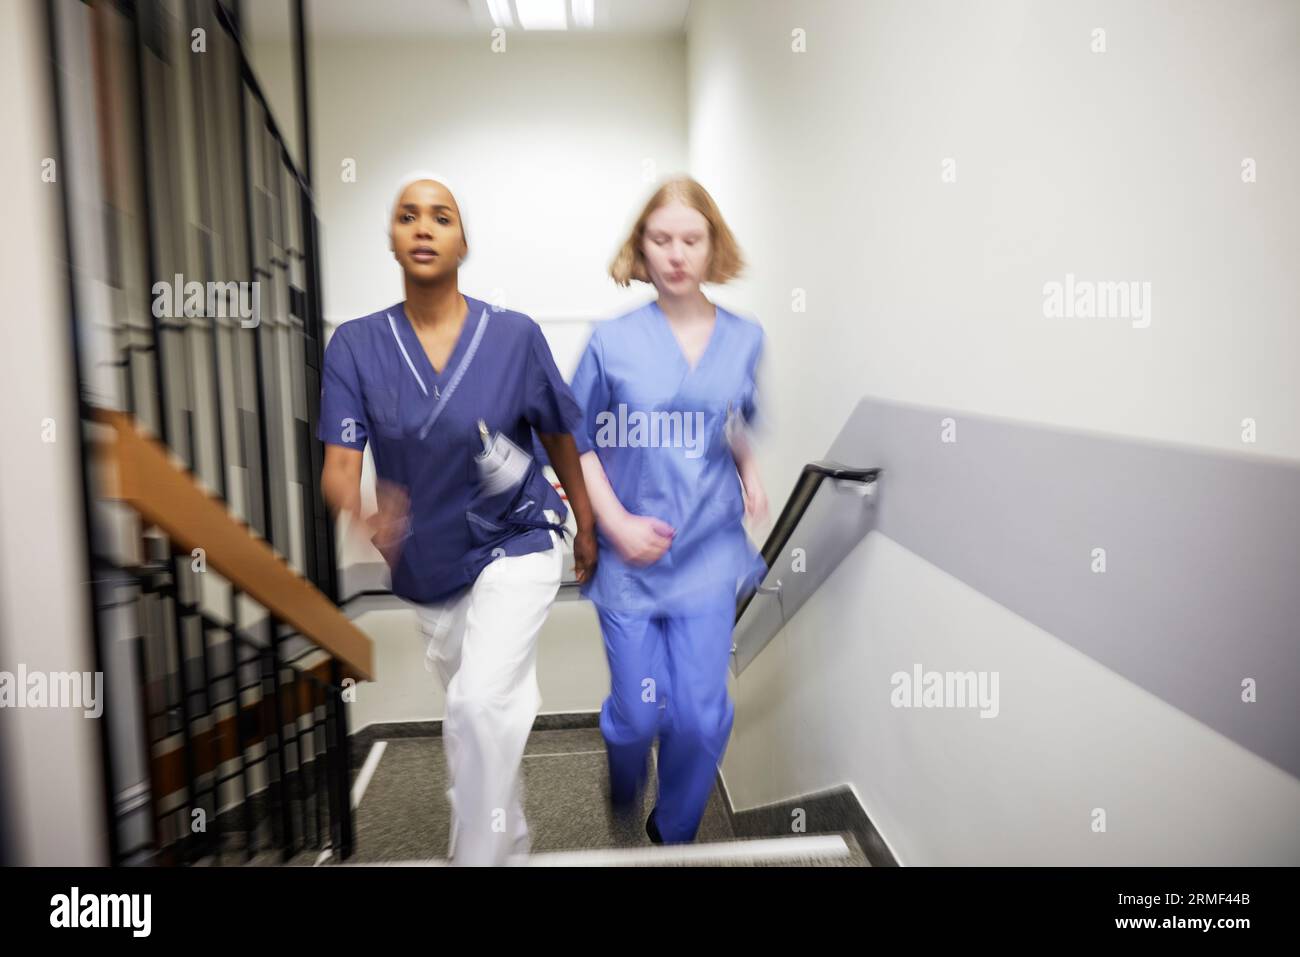 Female doctors walking at staircase together Stock Photo